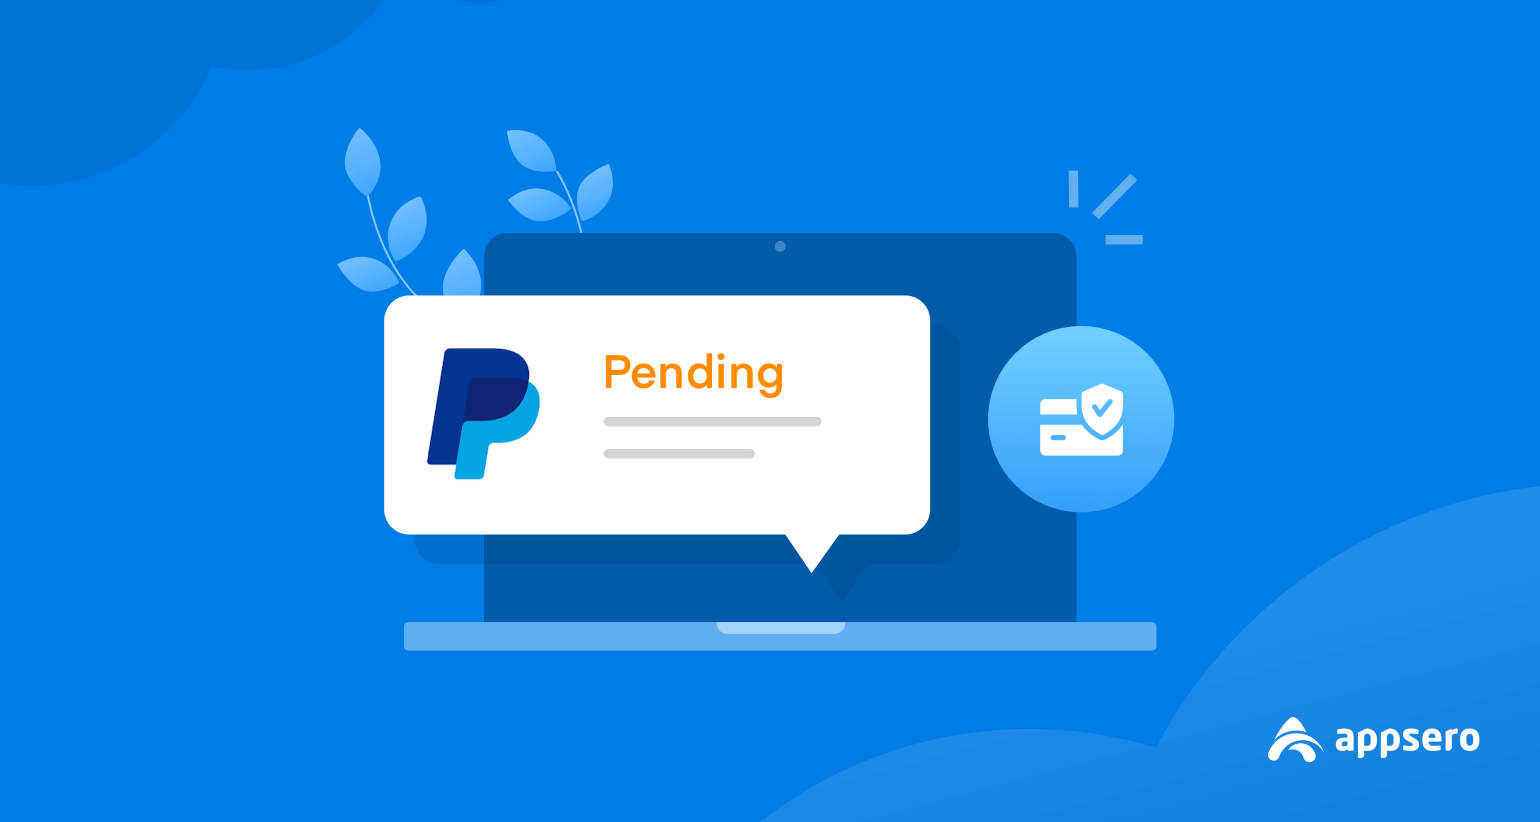 What Does It Mean When a Transaction is Pending